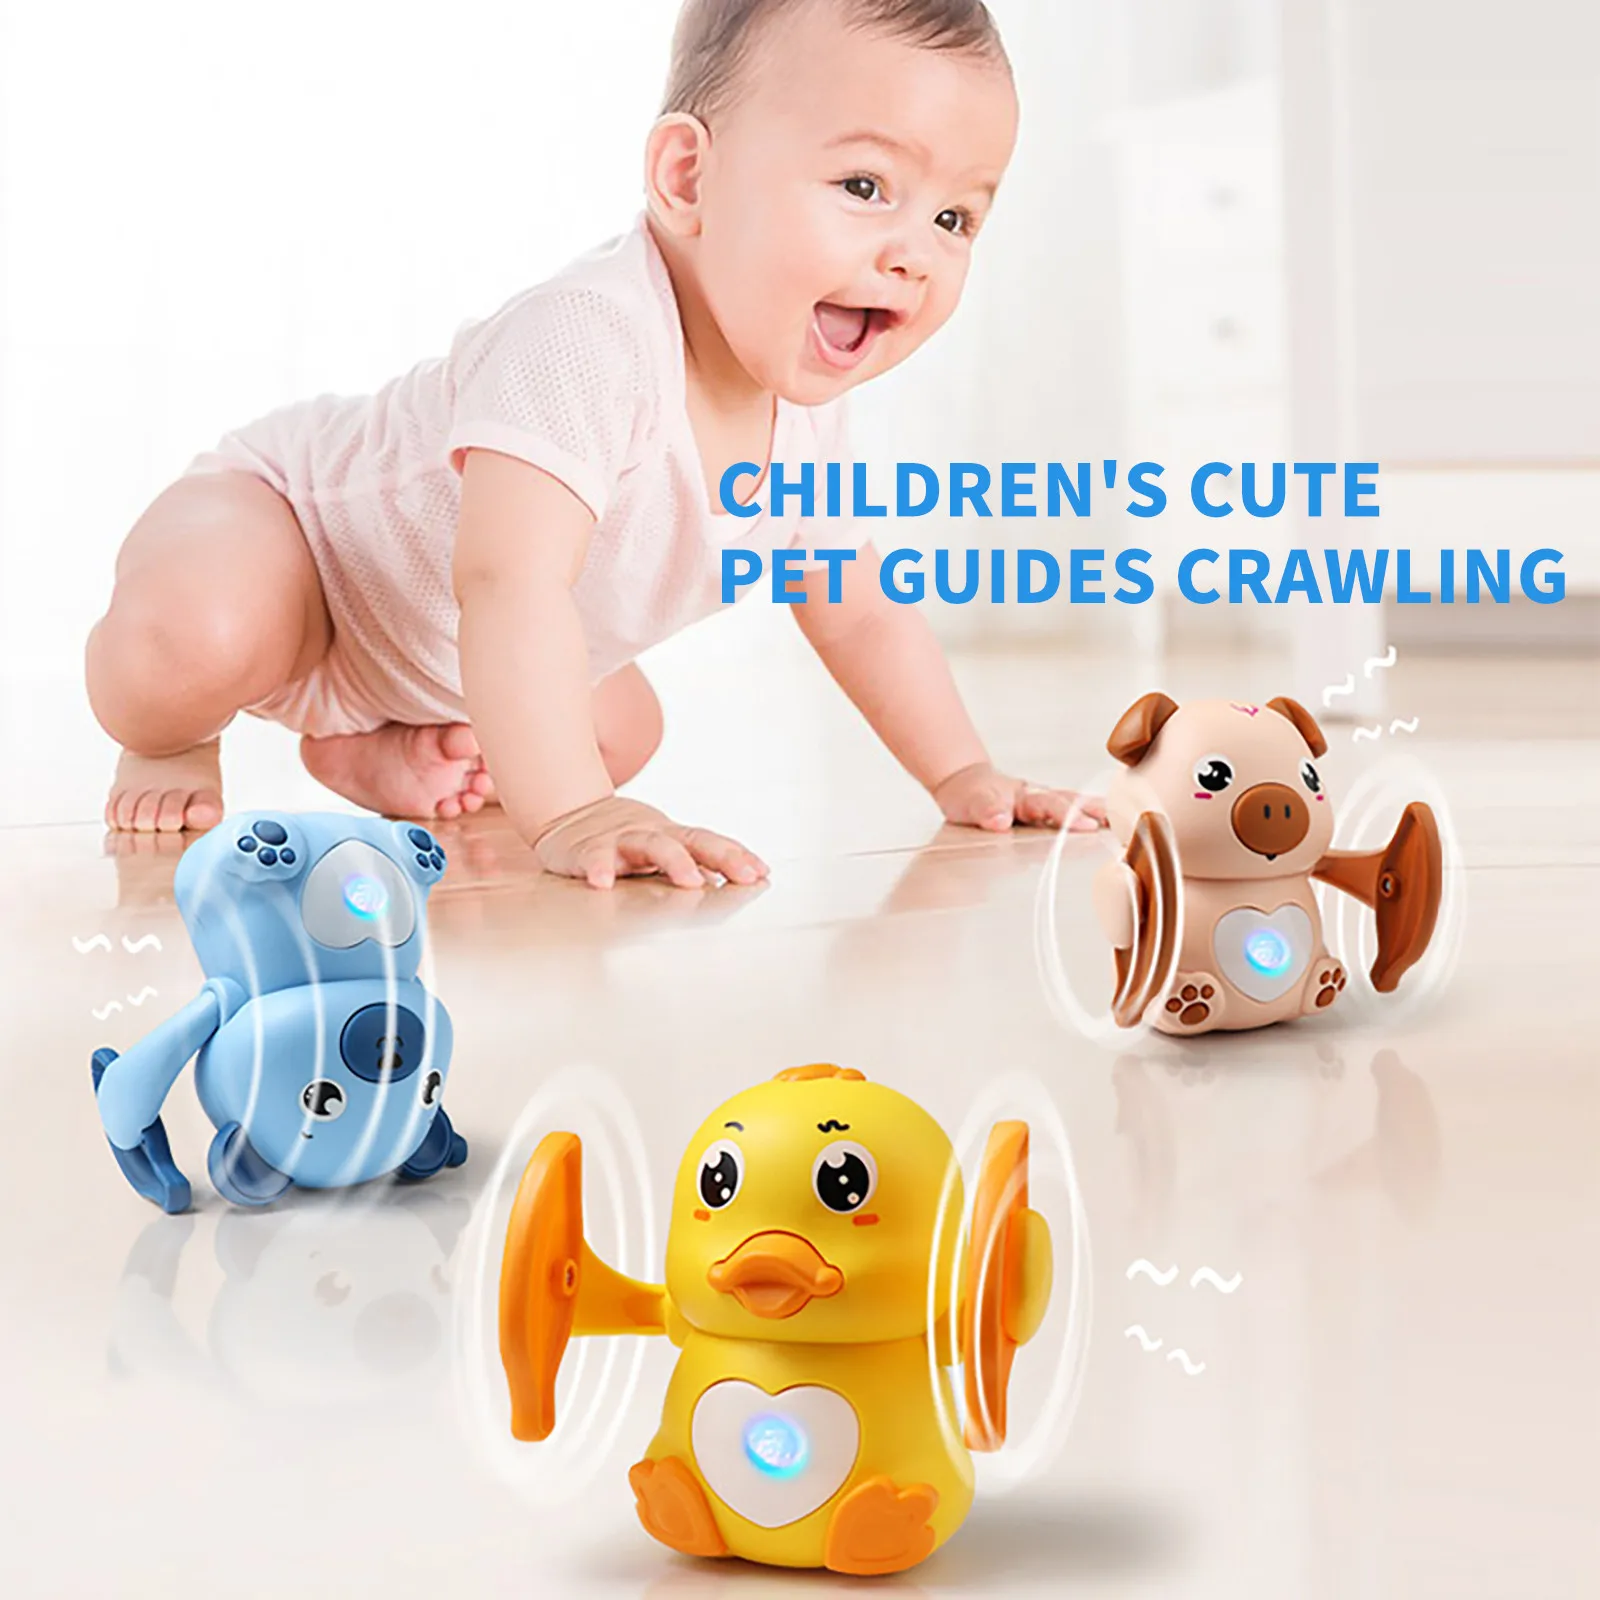 

Baby Voice Control Rolling Little Dancing Monkey/Duck/Bear Toy Walk Sing Brain Game Interactive Crawling Electric Toys for Kids